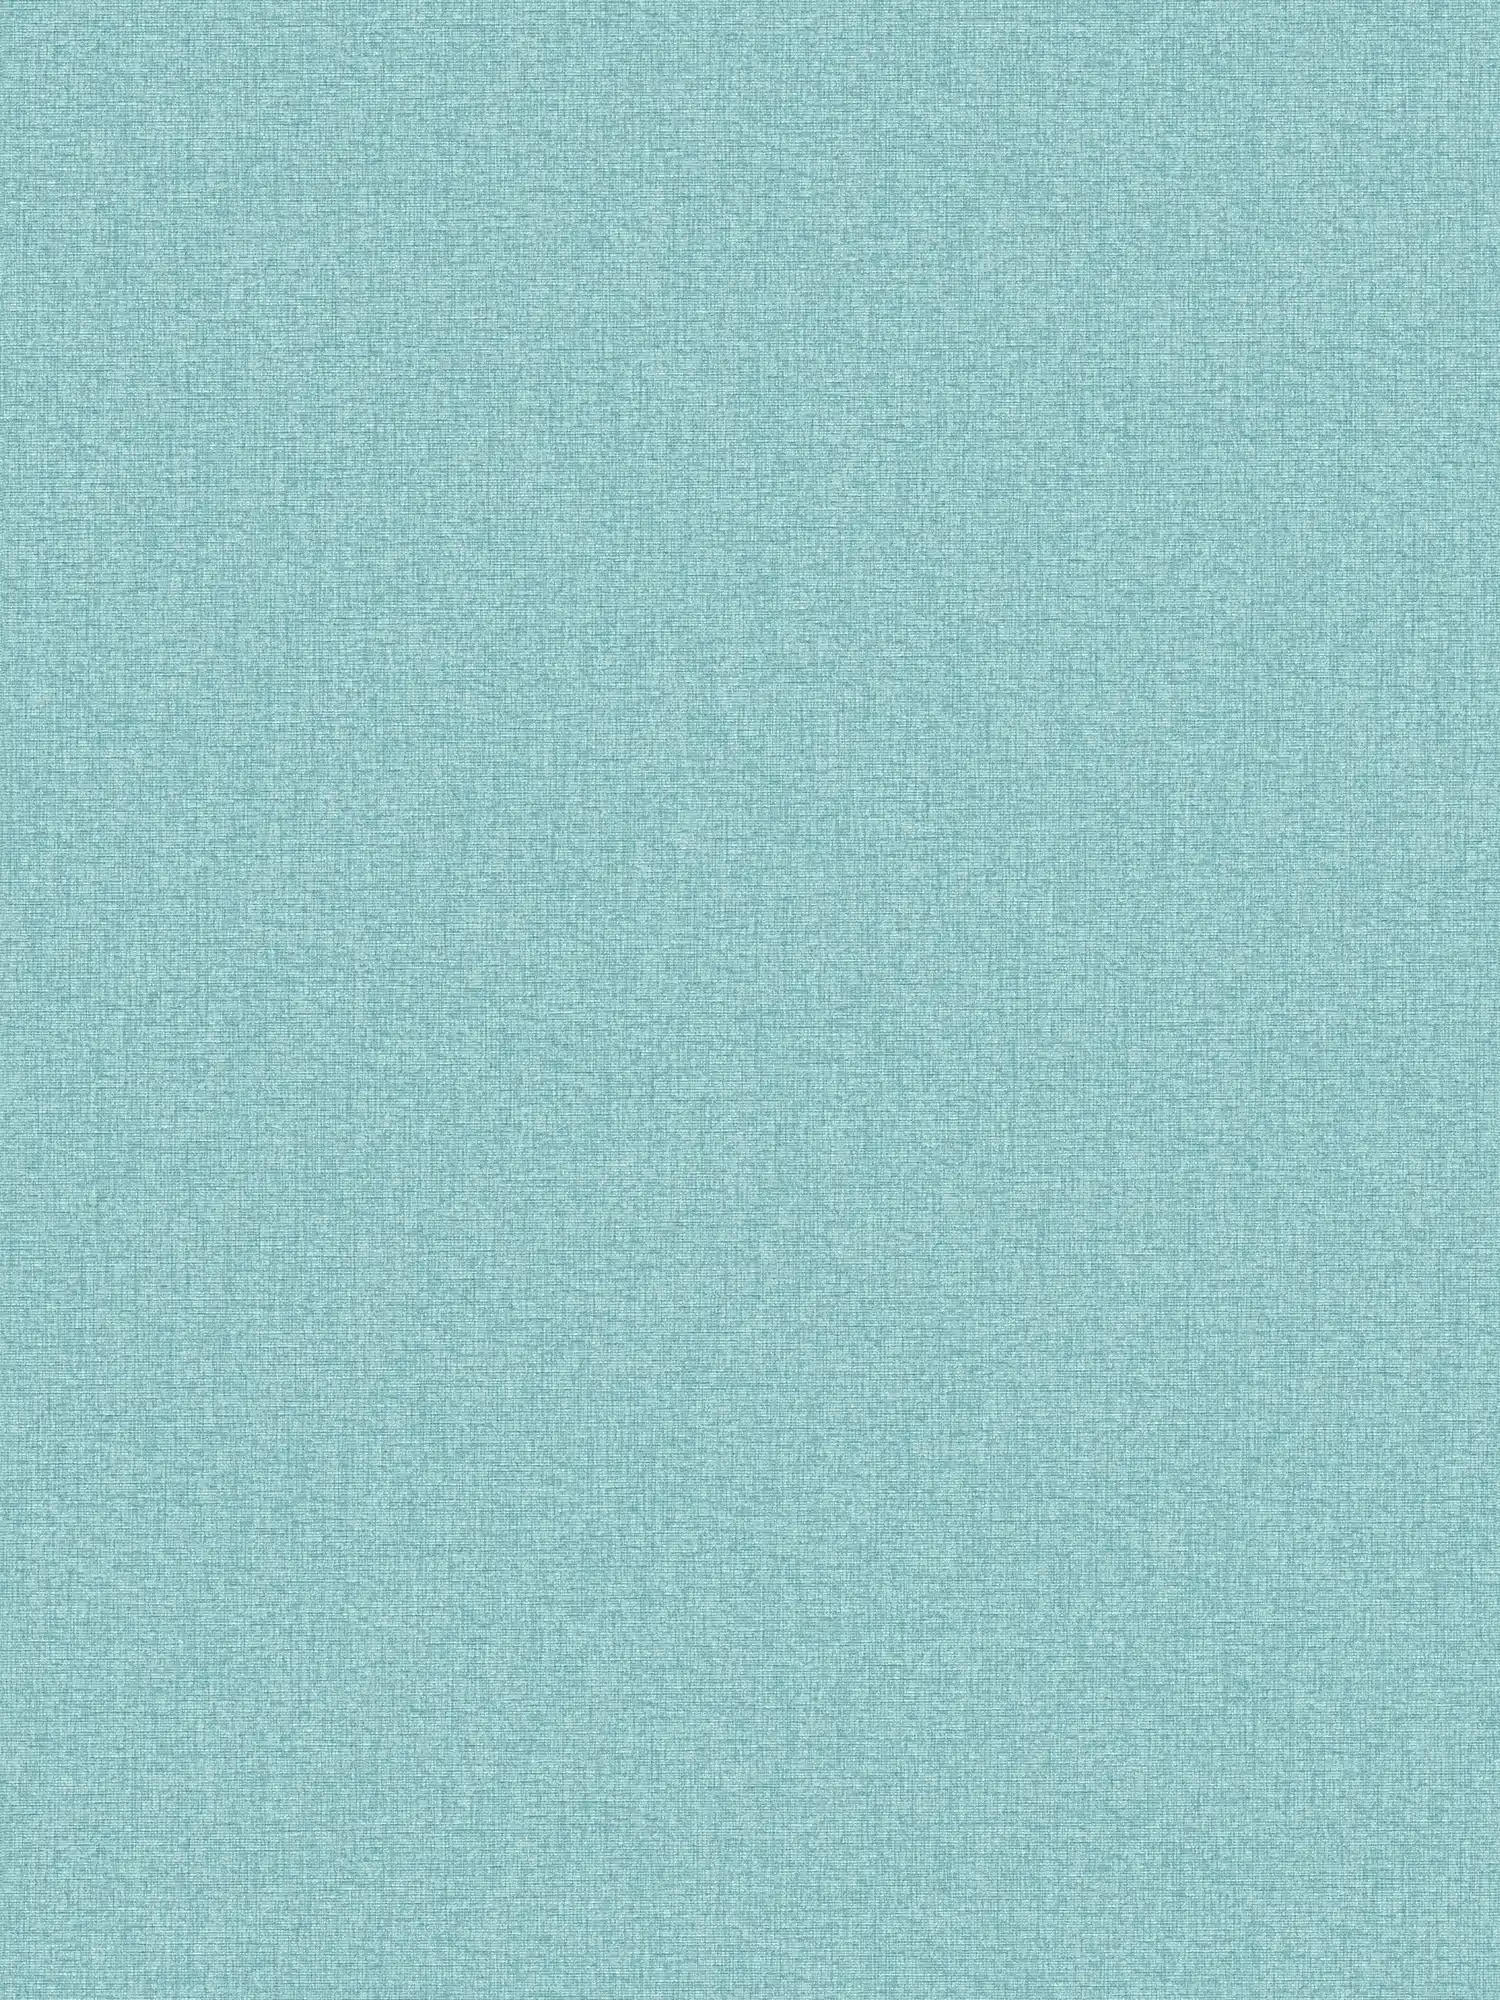 Plain non-woven wallpaper in fabric look with light structure, matt - turquoise, blue, light blue
